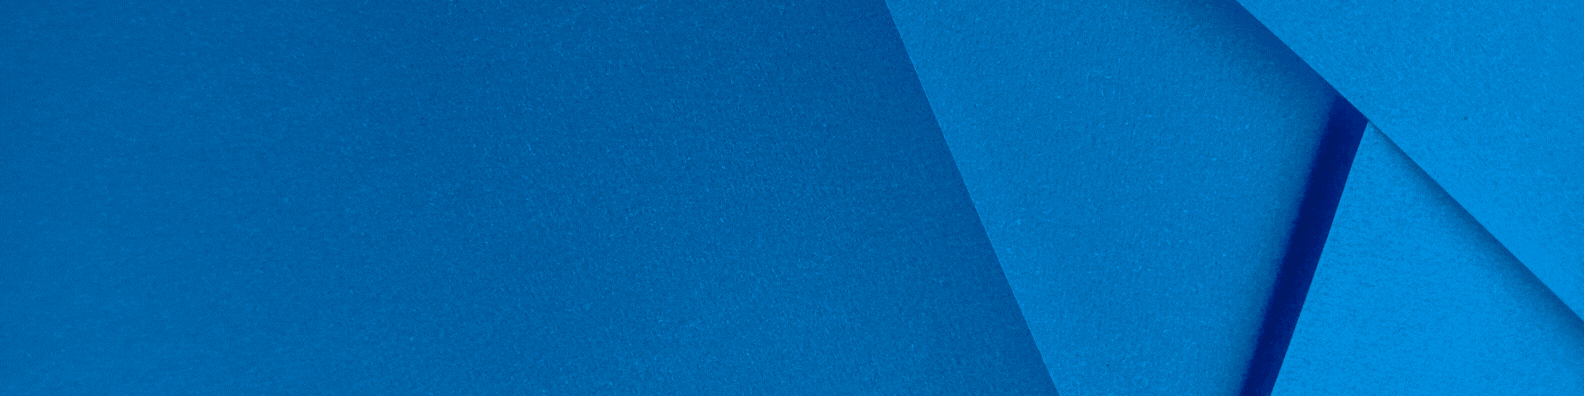 Blue and White Minimalist Business Consultant LinkedIn Background Photo.gif